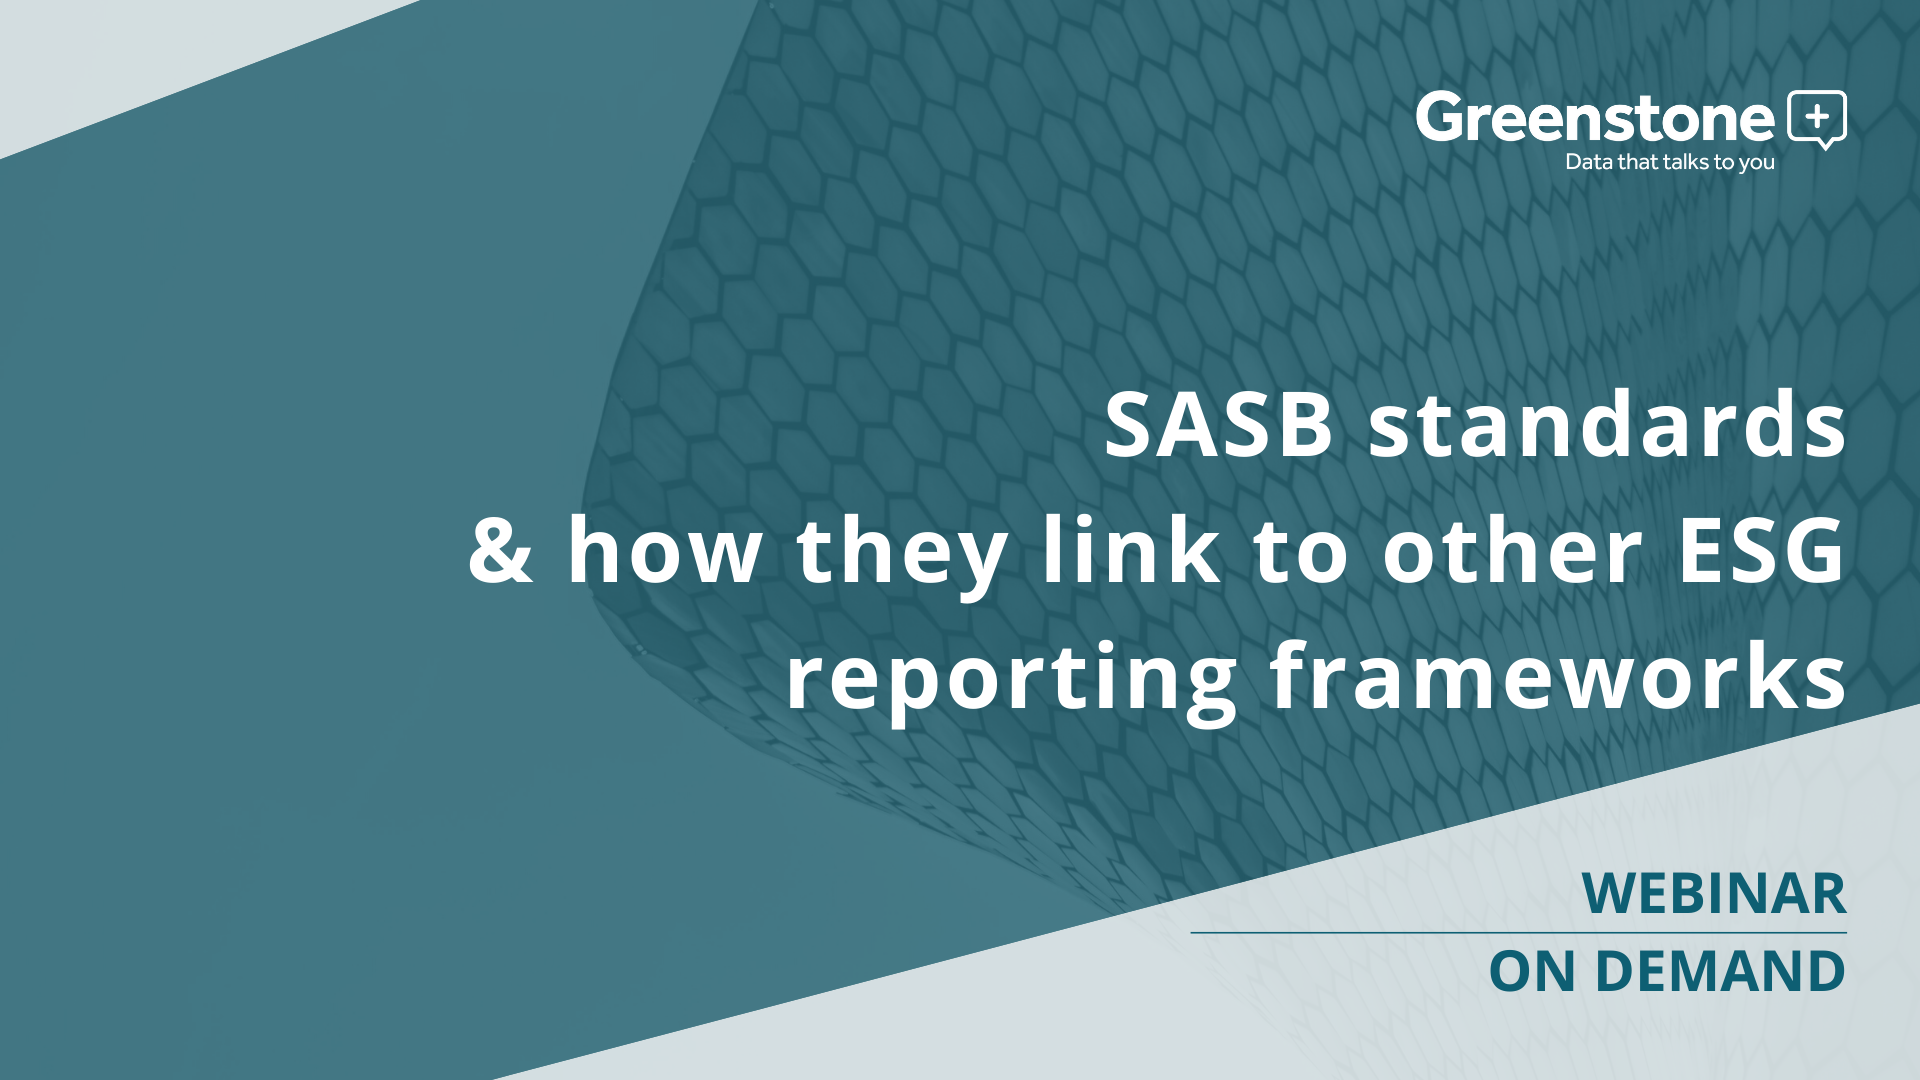 The SASB Standards & how they link to other reporting frameworks